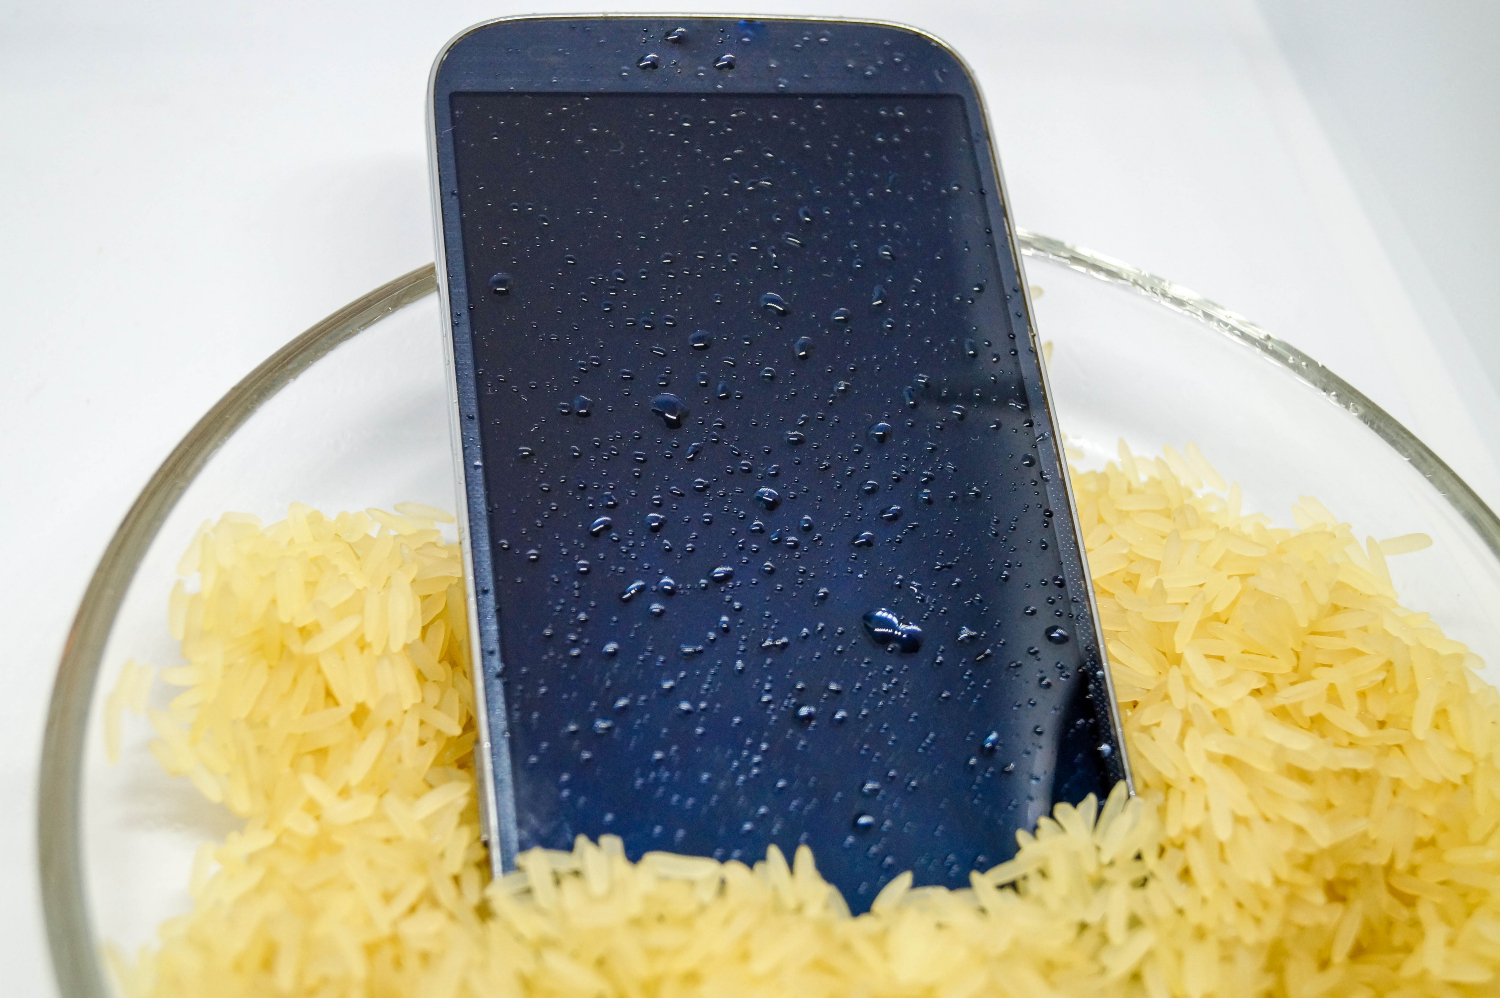 phone wet placed in rice